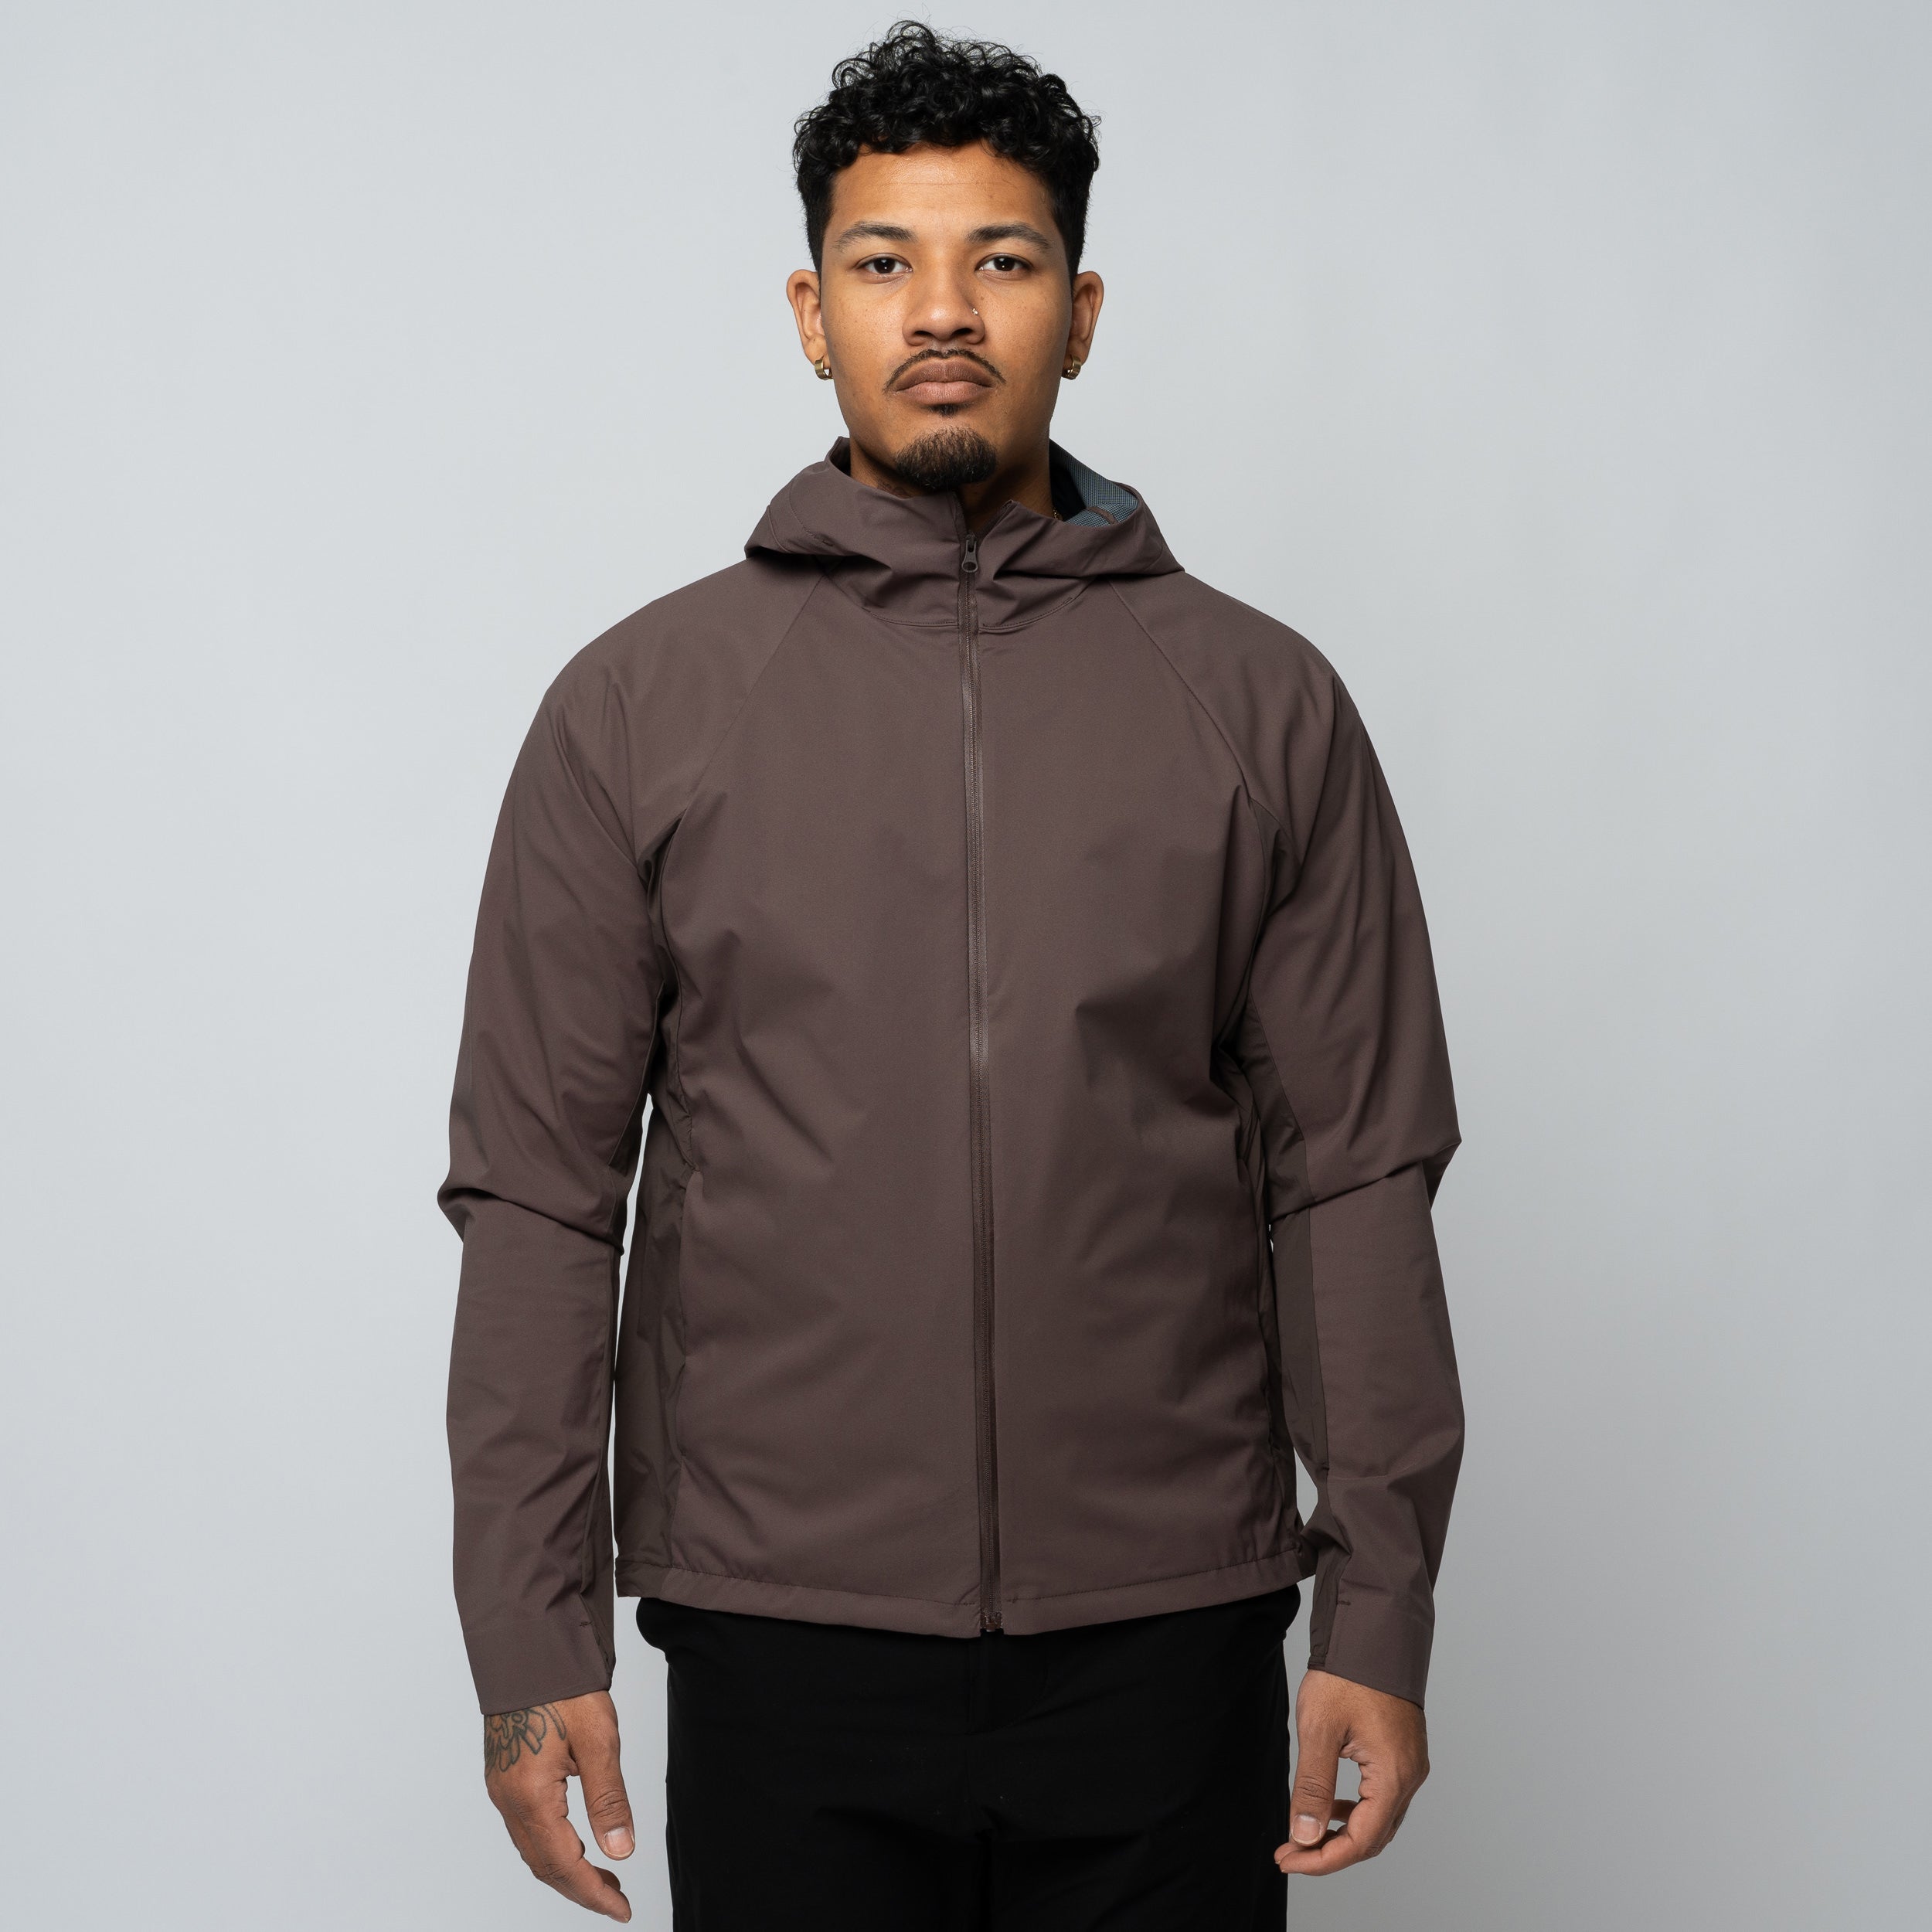 PAF 6.0 Technical Jacket Right Brown 60OTRBR